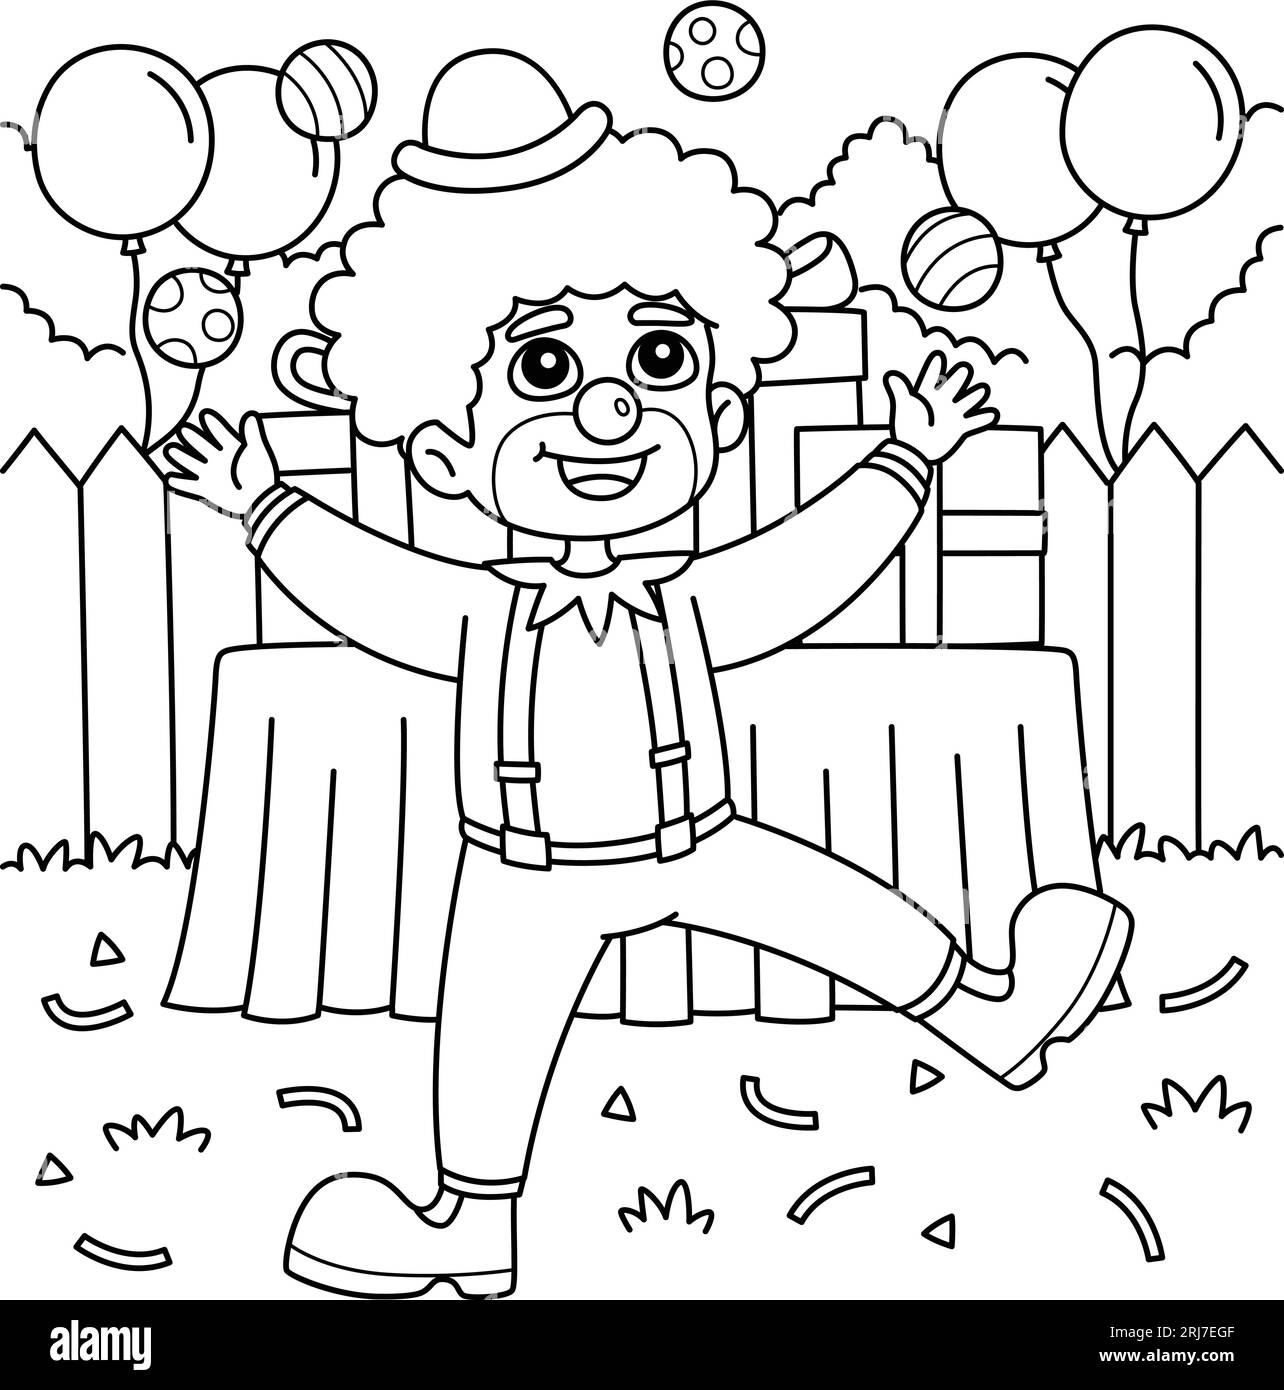 Birthday Clown Coloring Page for Kids Stock Vector